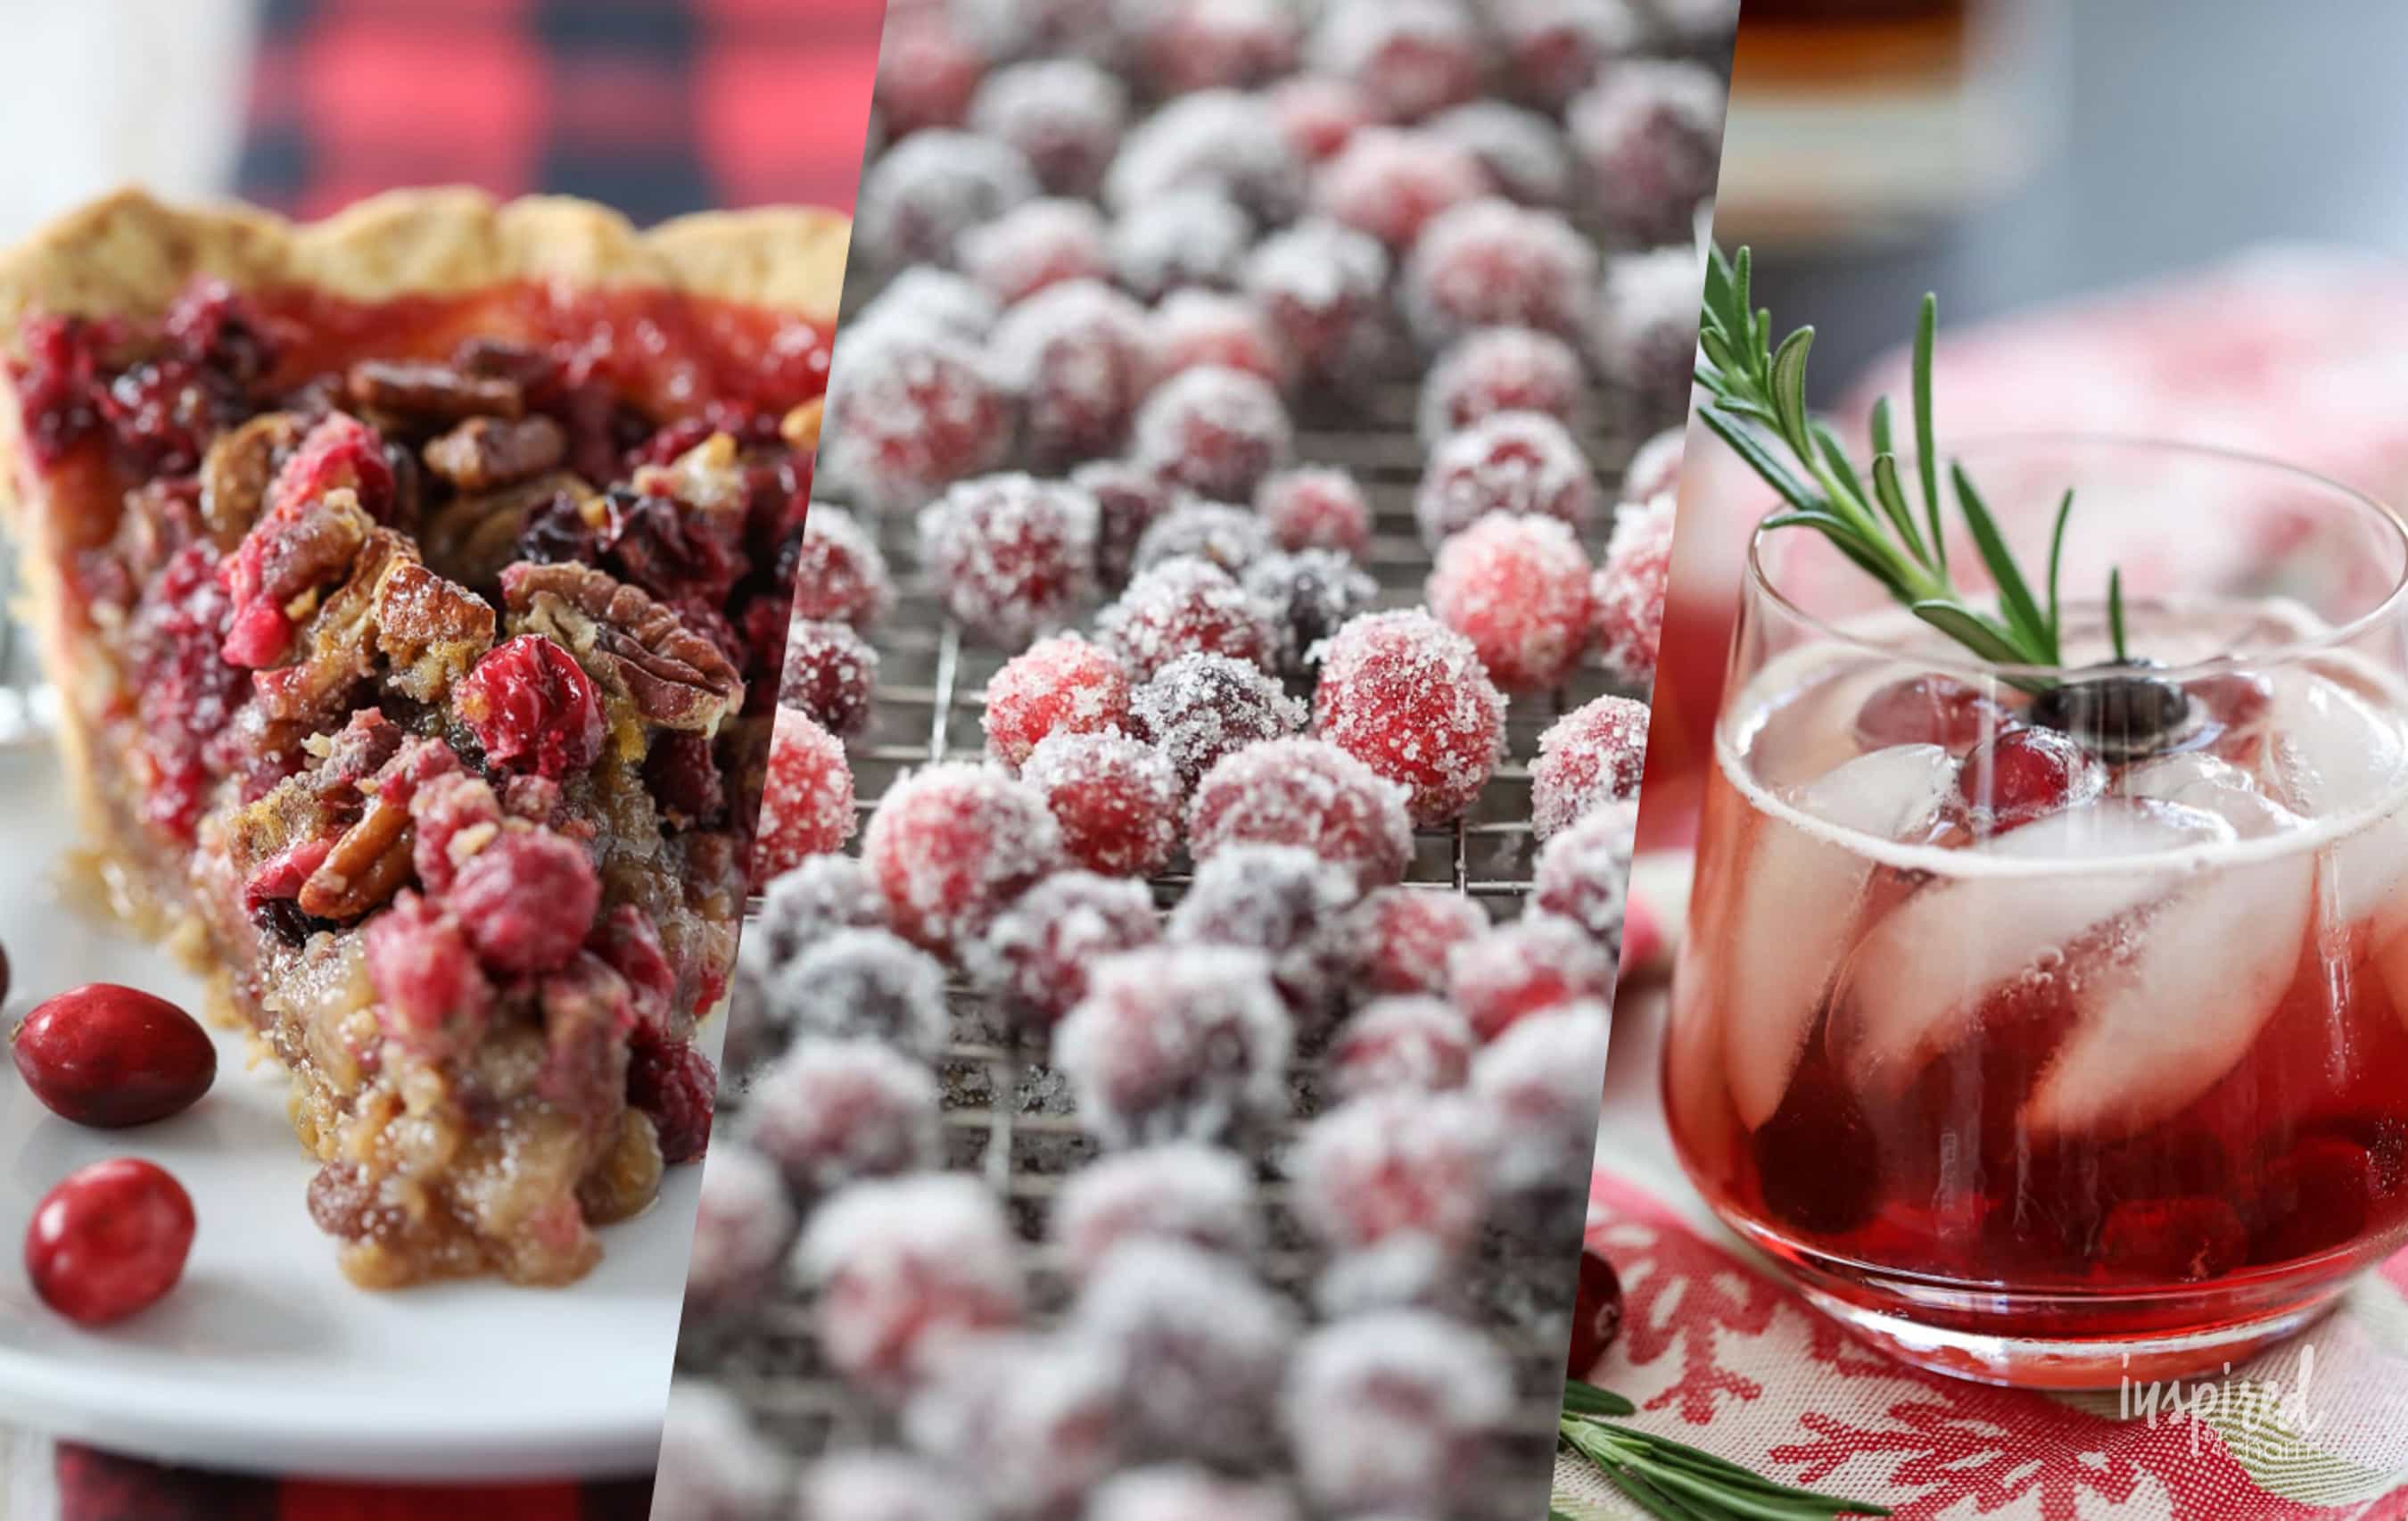 A collection of my favorite Cranberry Recipes perfect for the holiday season! #cranberry #recipes #thanksgiving #christmas #dessert #cocktail #holdiay #baking #appetizers